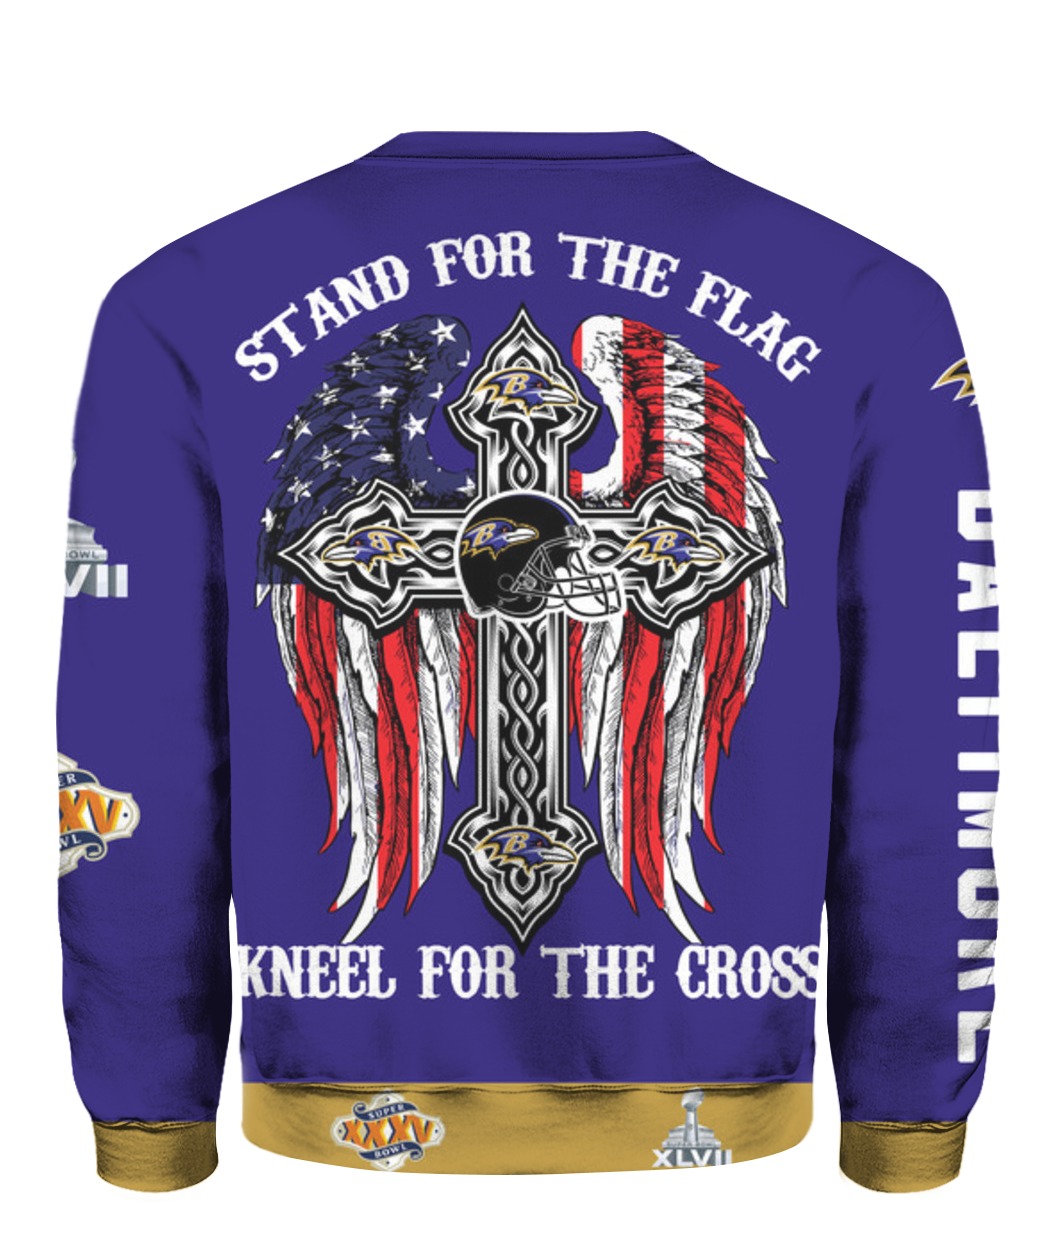 Stand for the flag kneel for the cross baltimore ravens all over print sweatshirt - back